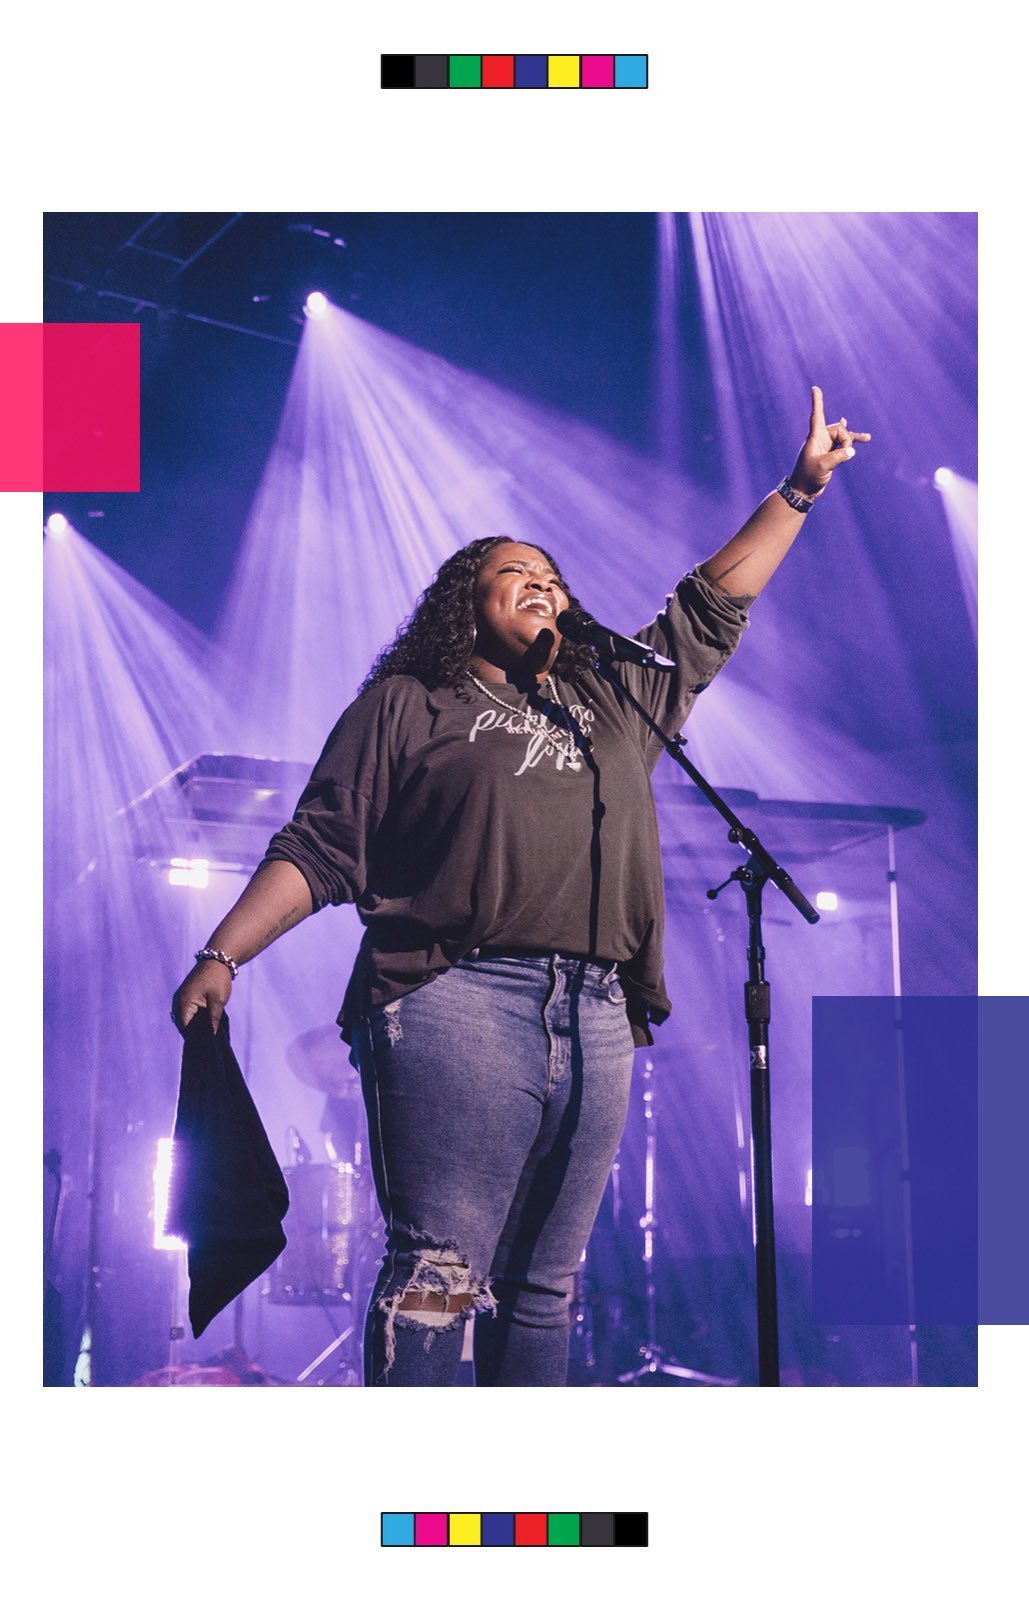 Bethel Music on Instagram: “”There is power in the name of Jesus to break every chain.” •• We love having Tasha Cobbs Leonard lead us in worship - she carries so much…”